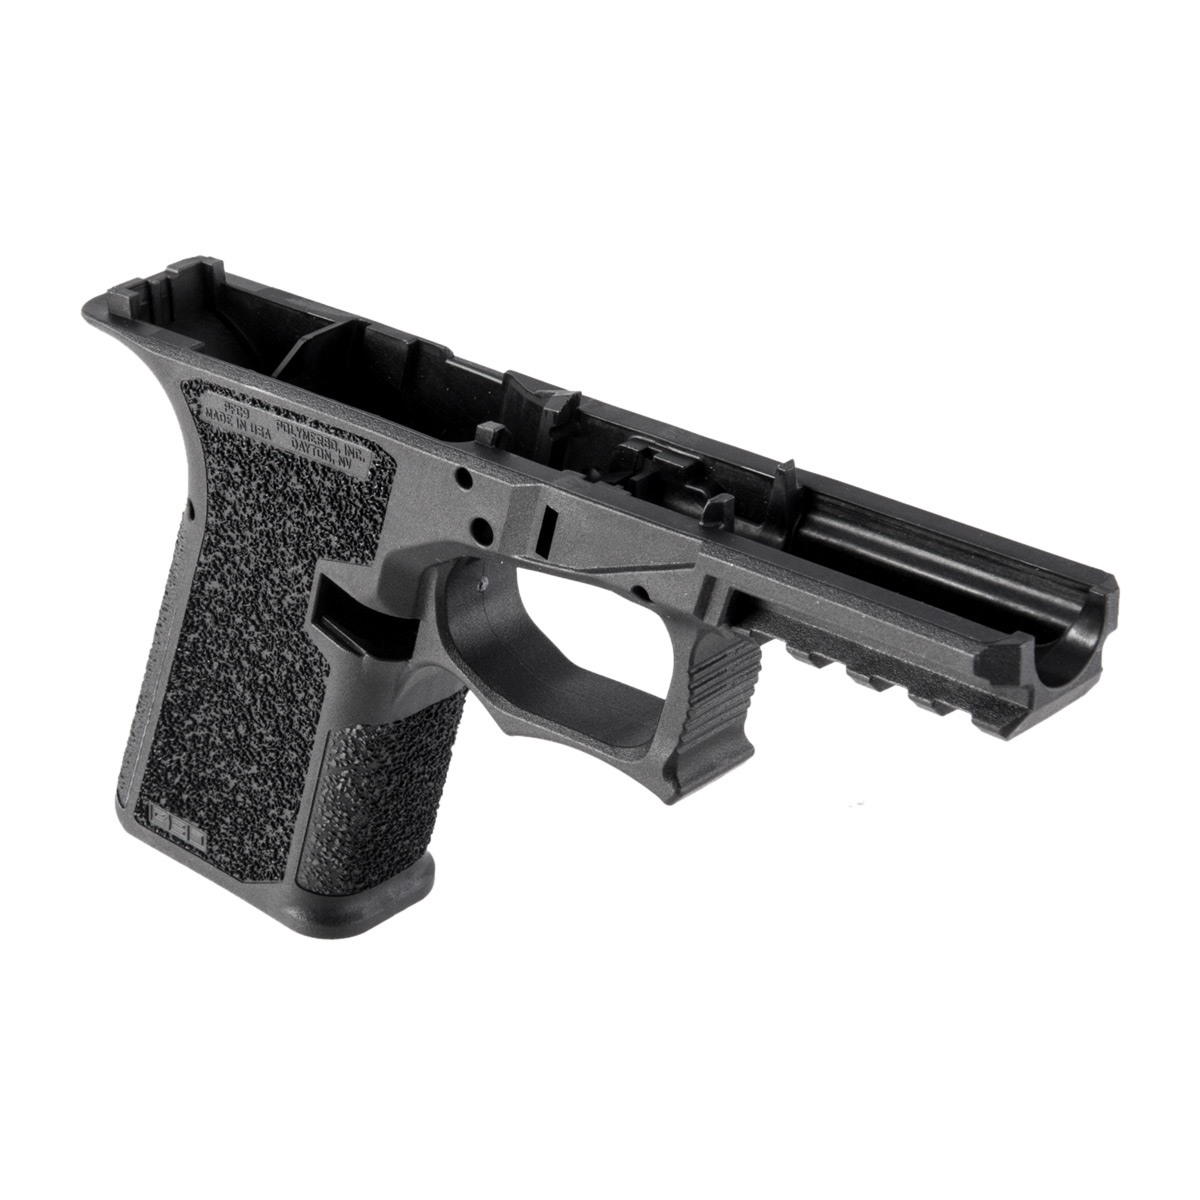 Polymer80 Pfc9 Serialized Frame For Glock 19 23 Brownells